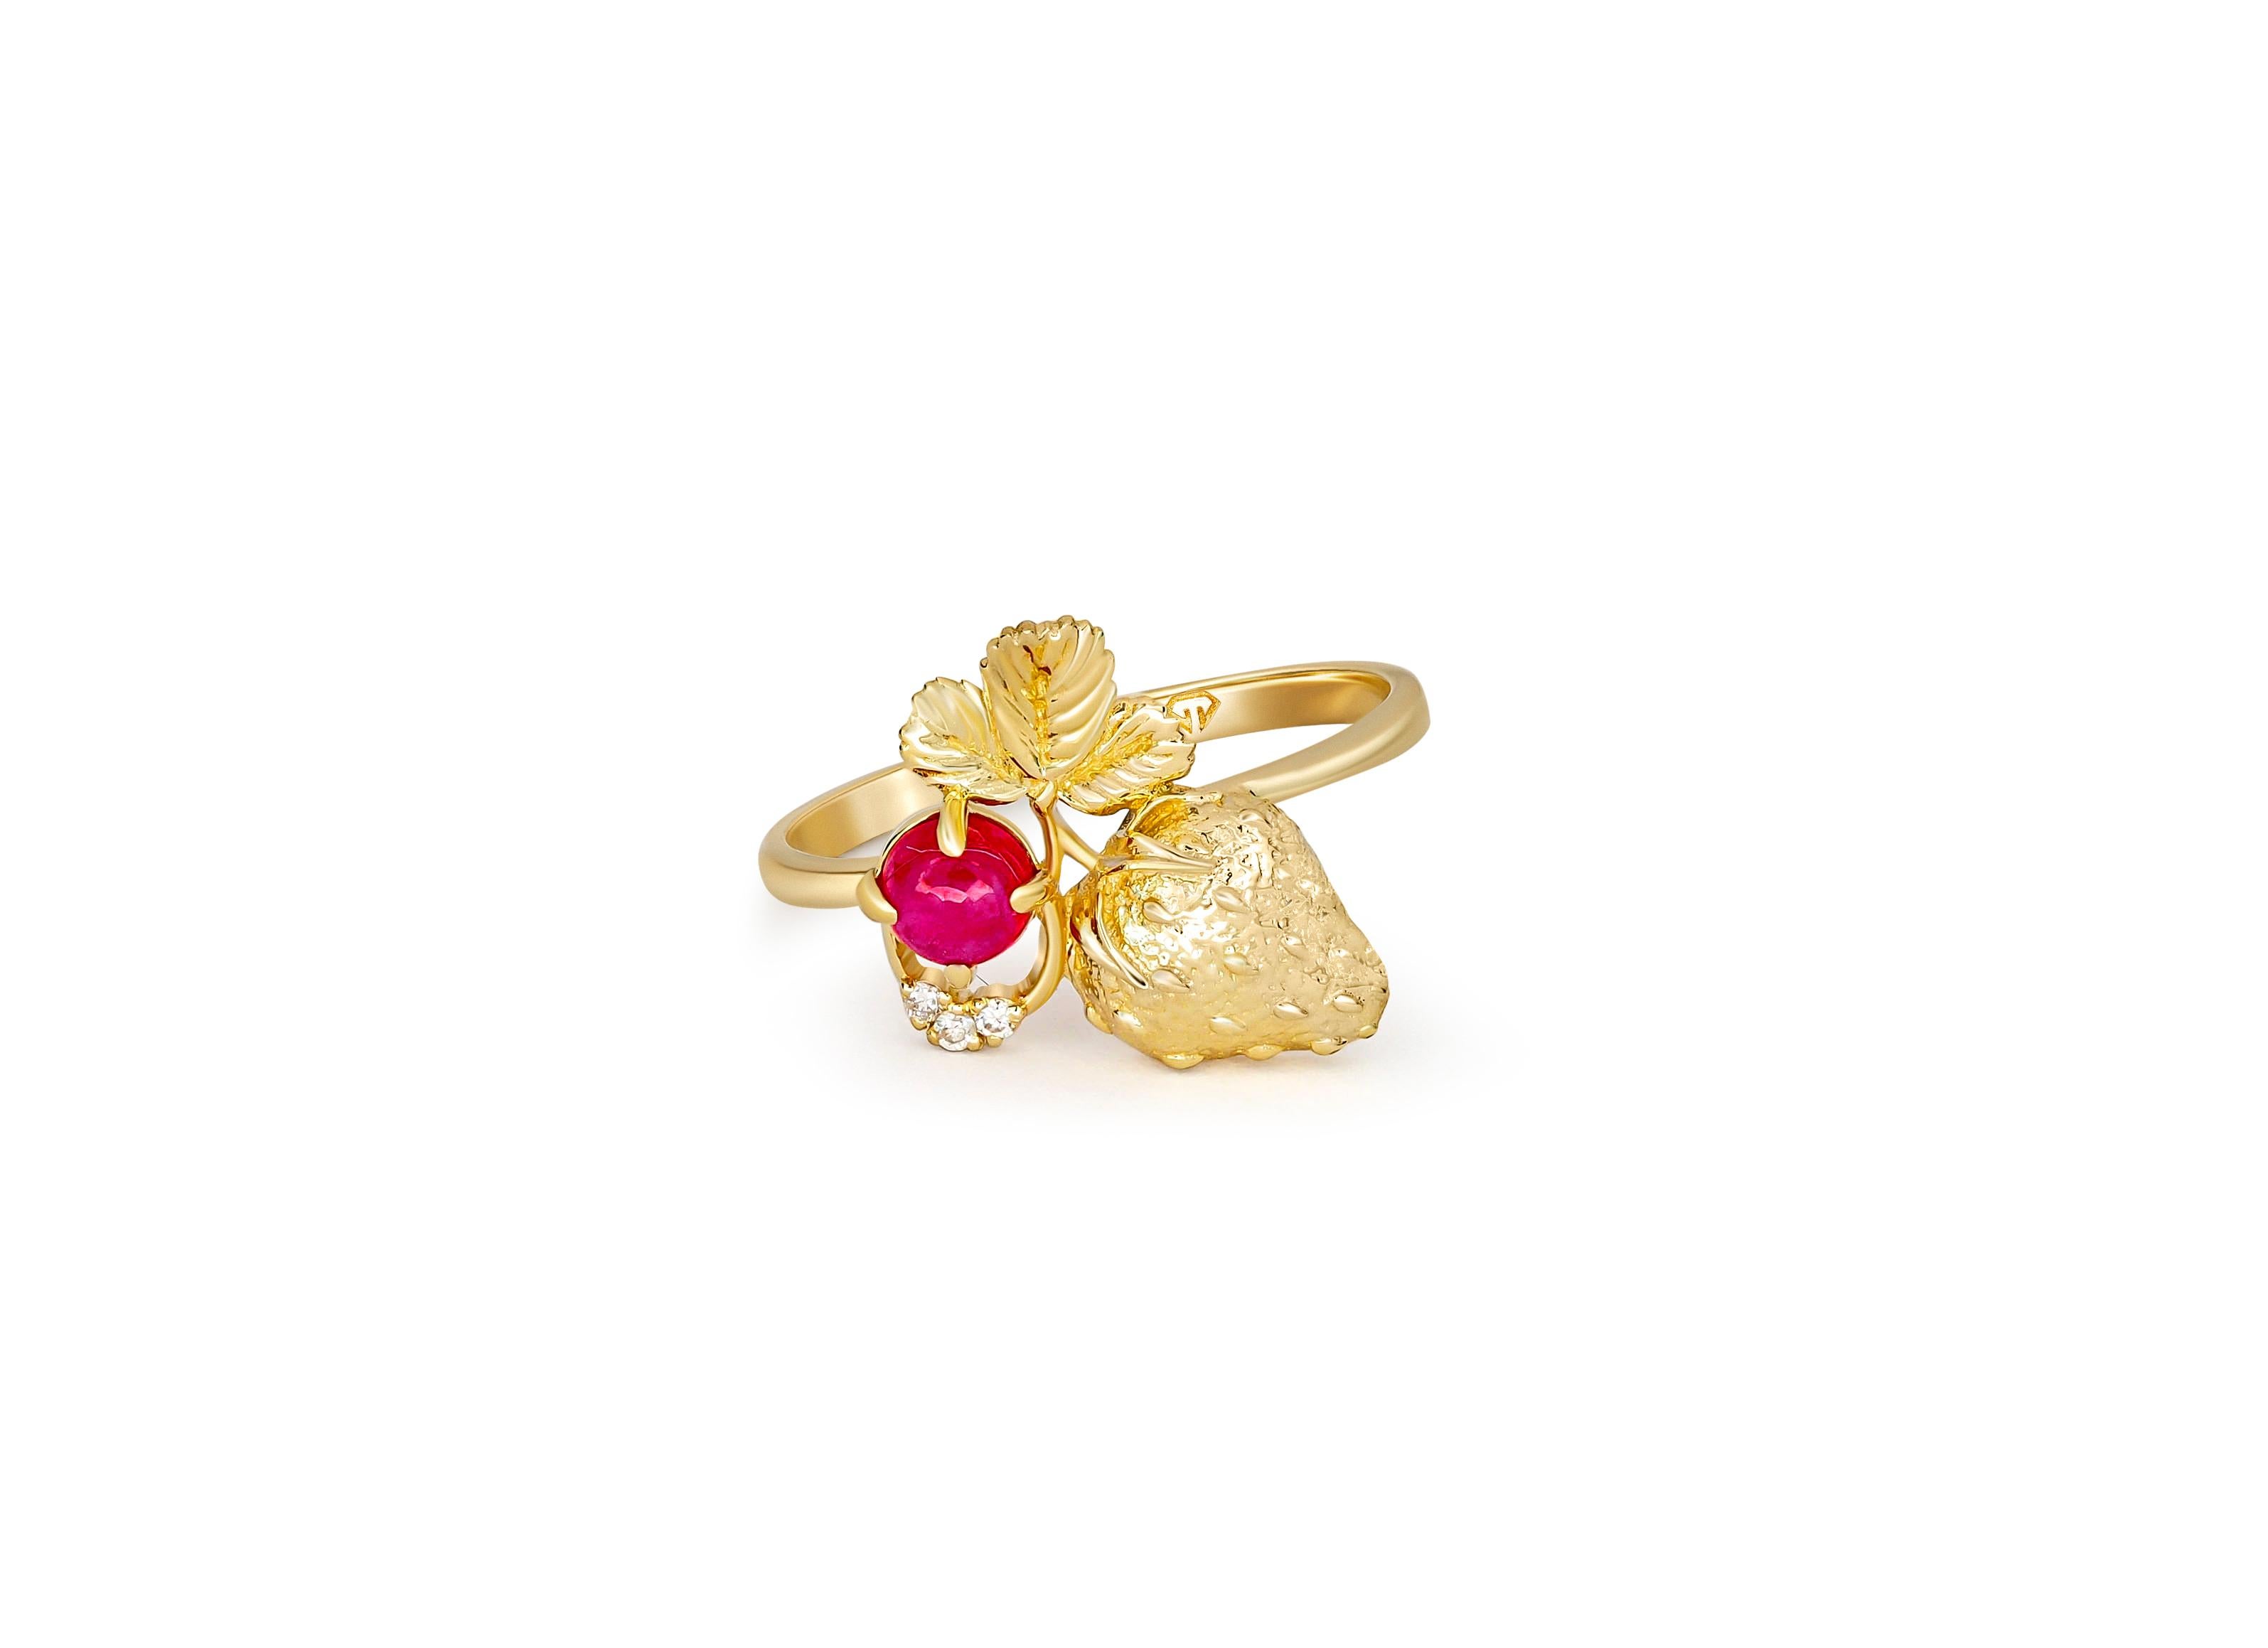 Strawberry gold ring with ruby. 
Round cabochon ruby ring. Ruby 14k gold ring. Gold berry ring. July birthstone ring. Gold Flower ring.

Metal: 14k gold
Weight: 2.0 g. depends from size.

Set with ruby, color - red
Cabochon cut, 0.45 ct. in total,